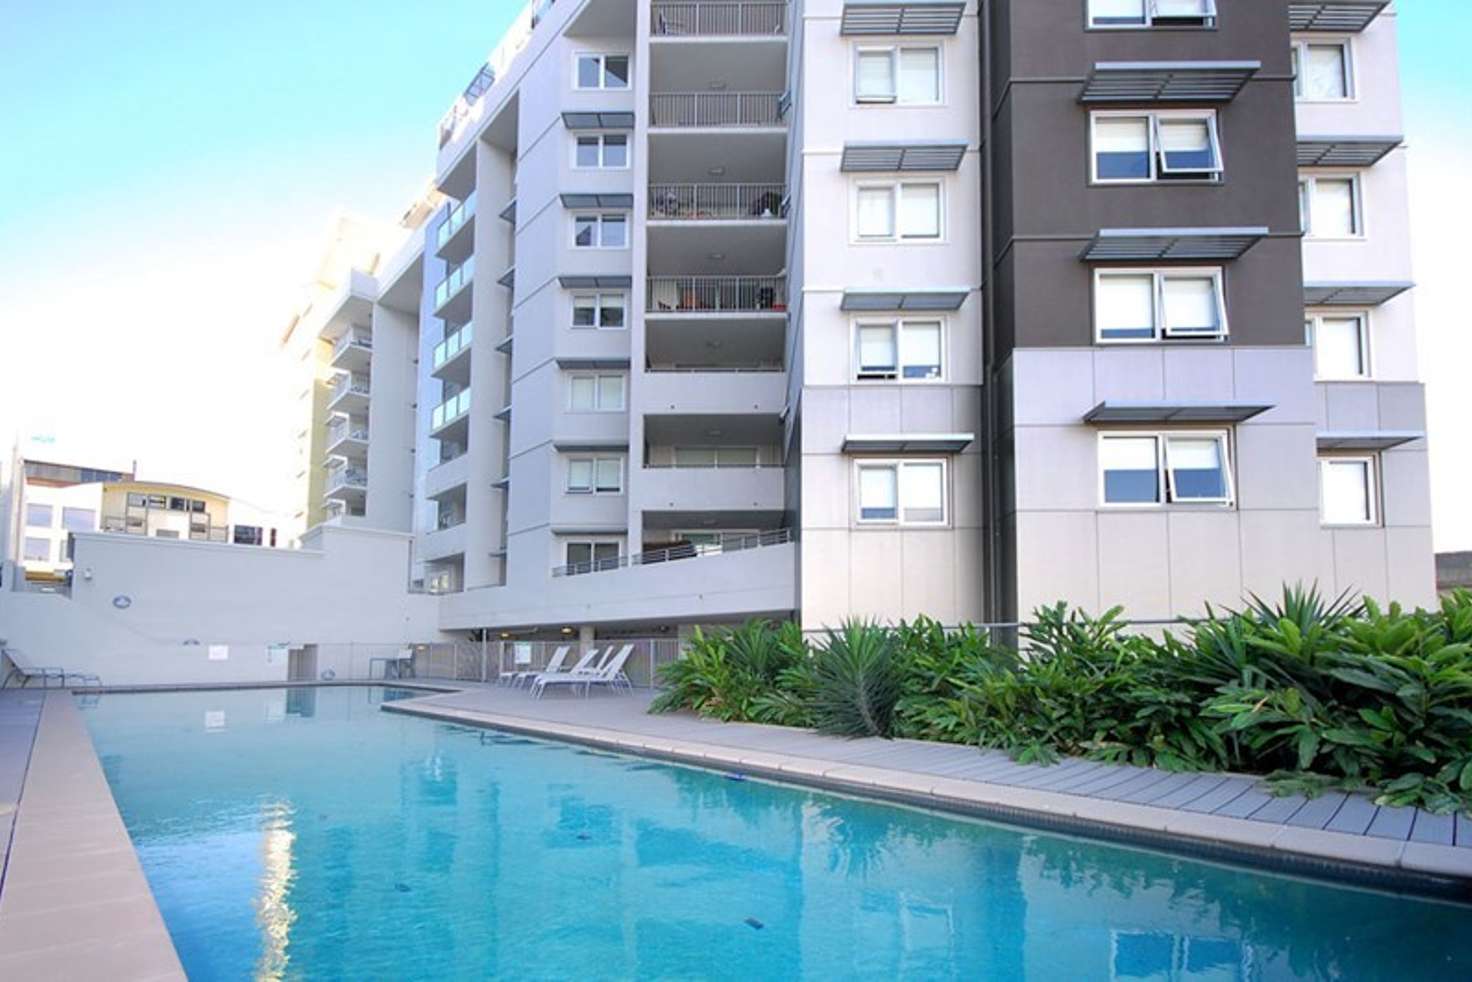 Main view of Homely apartment listing, 606/6 Exford Street, Brisbane QLD 4000